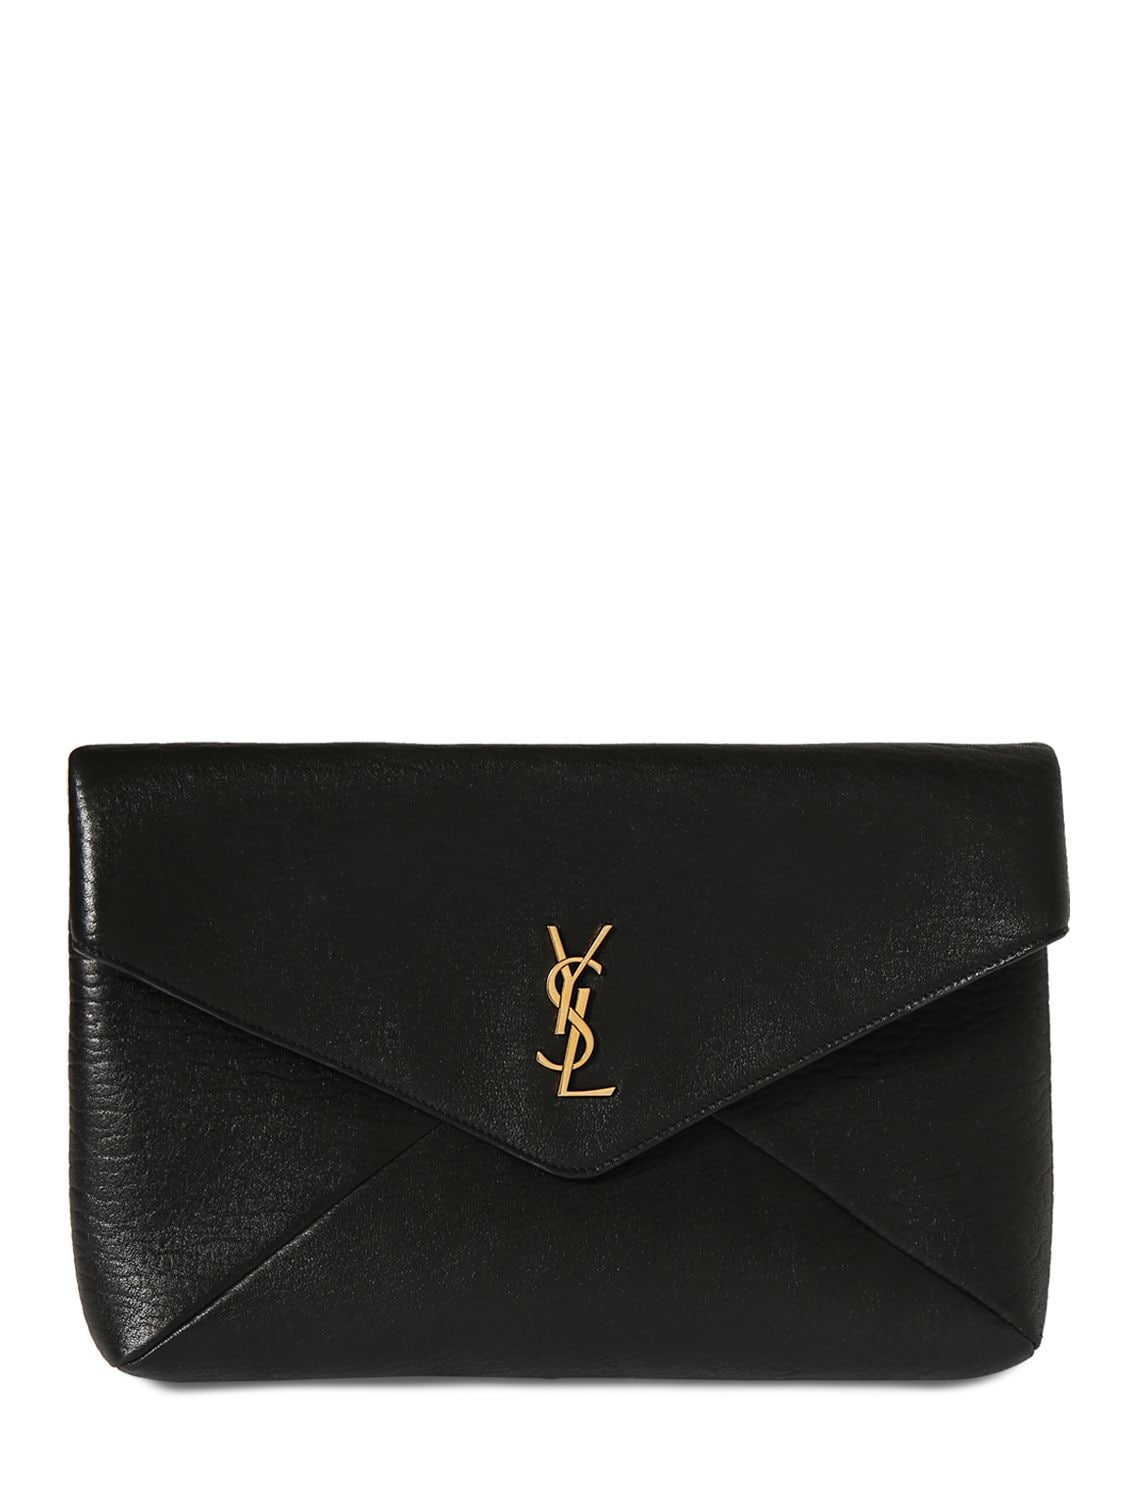 Saint Laurent Small Calypso Leather Pillow Pouch In Black